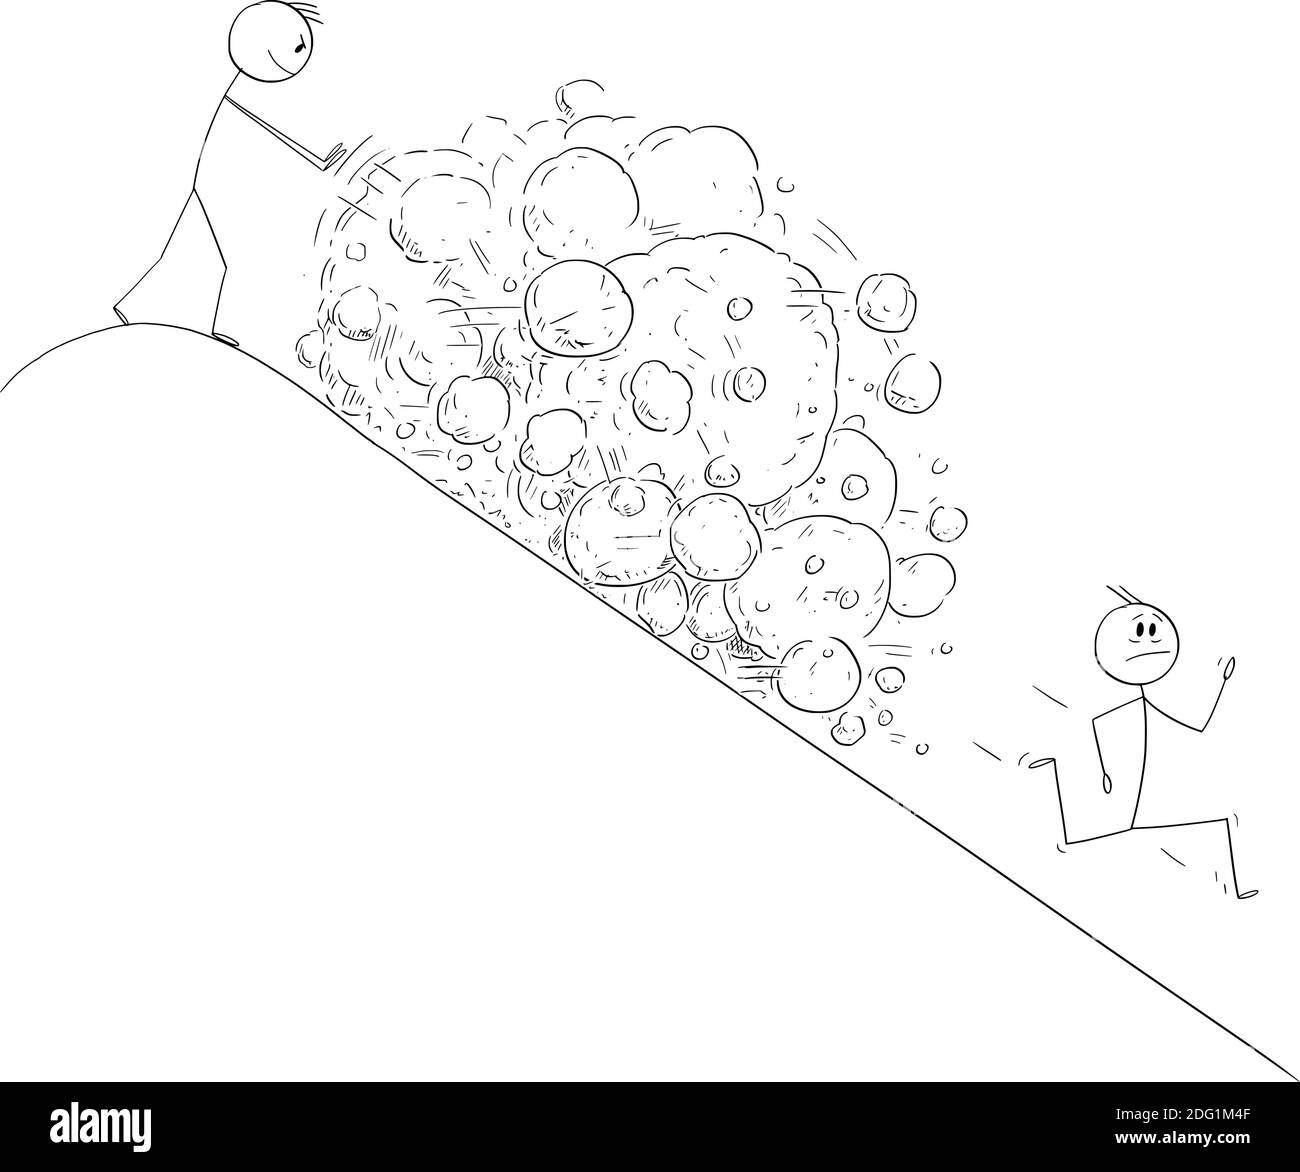 Vector cartoon stick figure illustration of man on top of hill creating avalanche of rocks falling on running competitor or enemy. Stock Vector